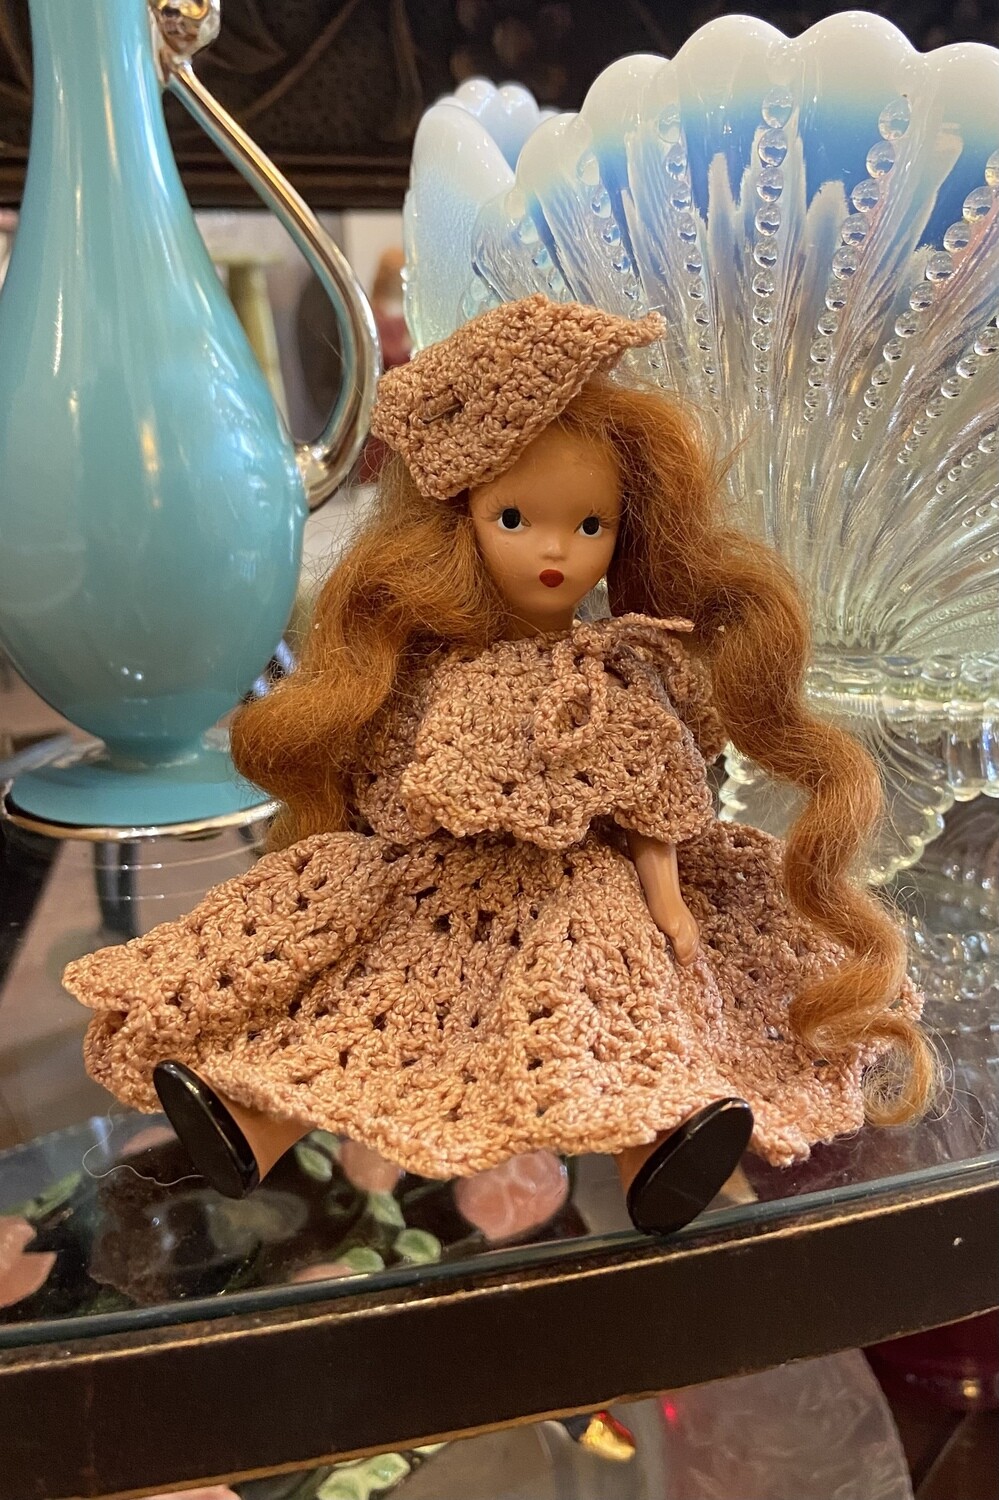 Vintage Jointed Plastic Doll with Crochet Outfit